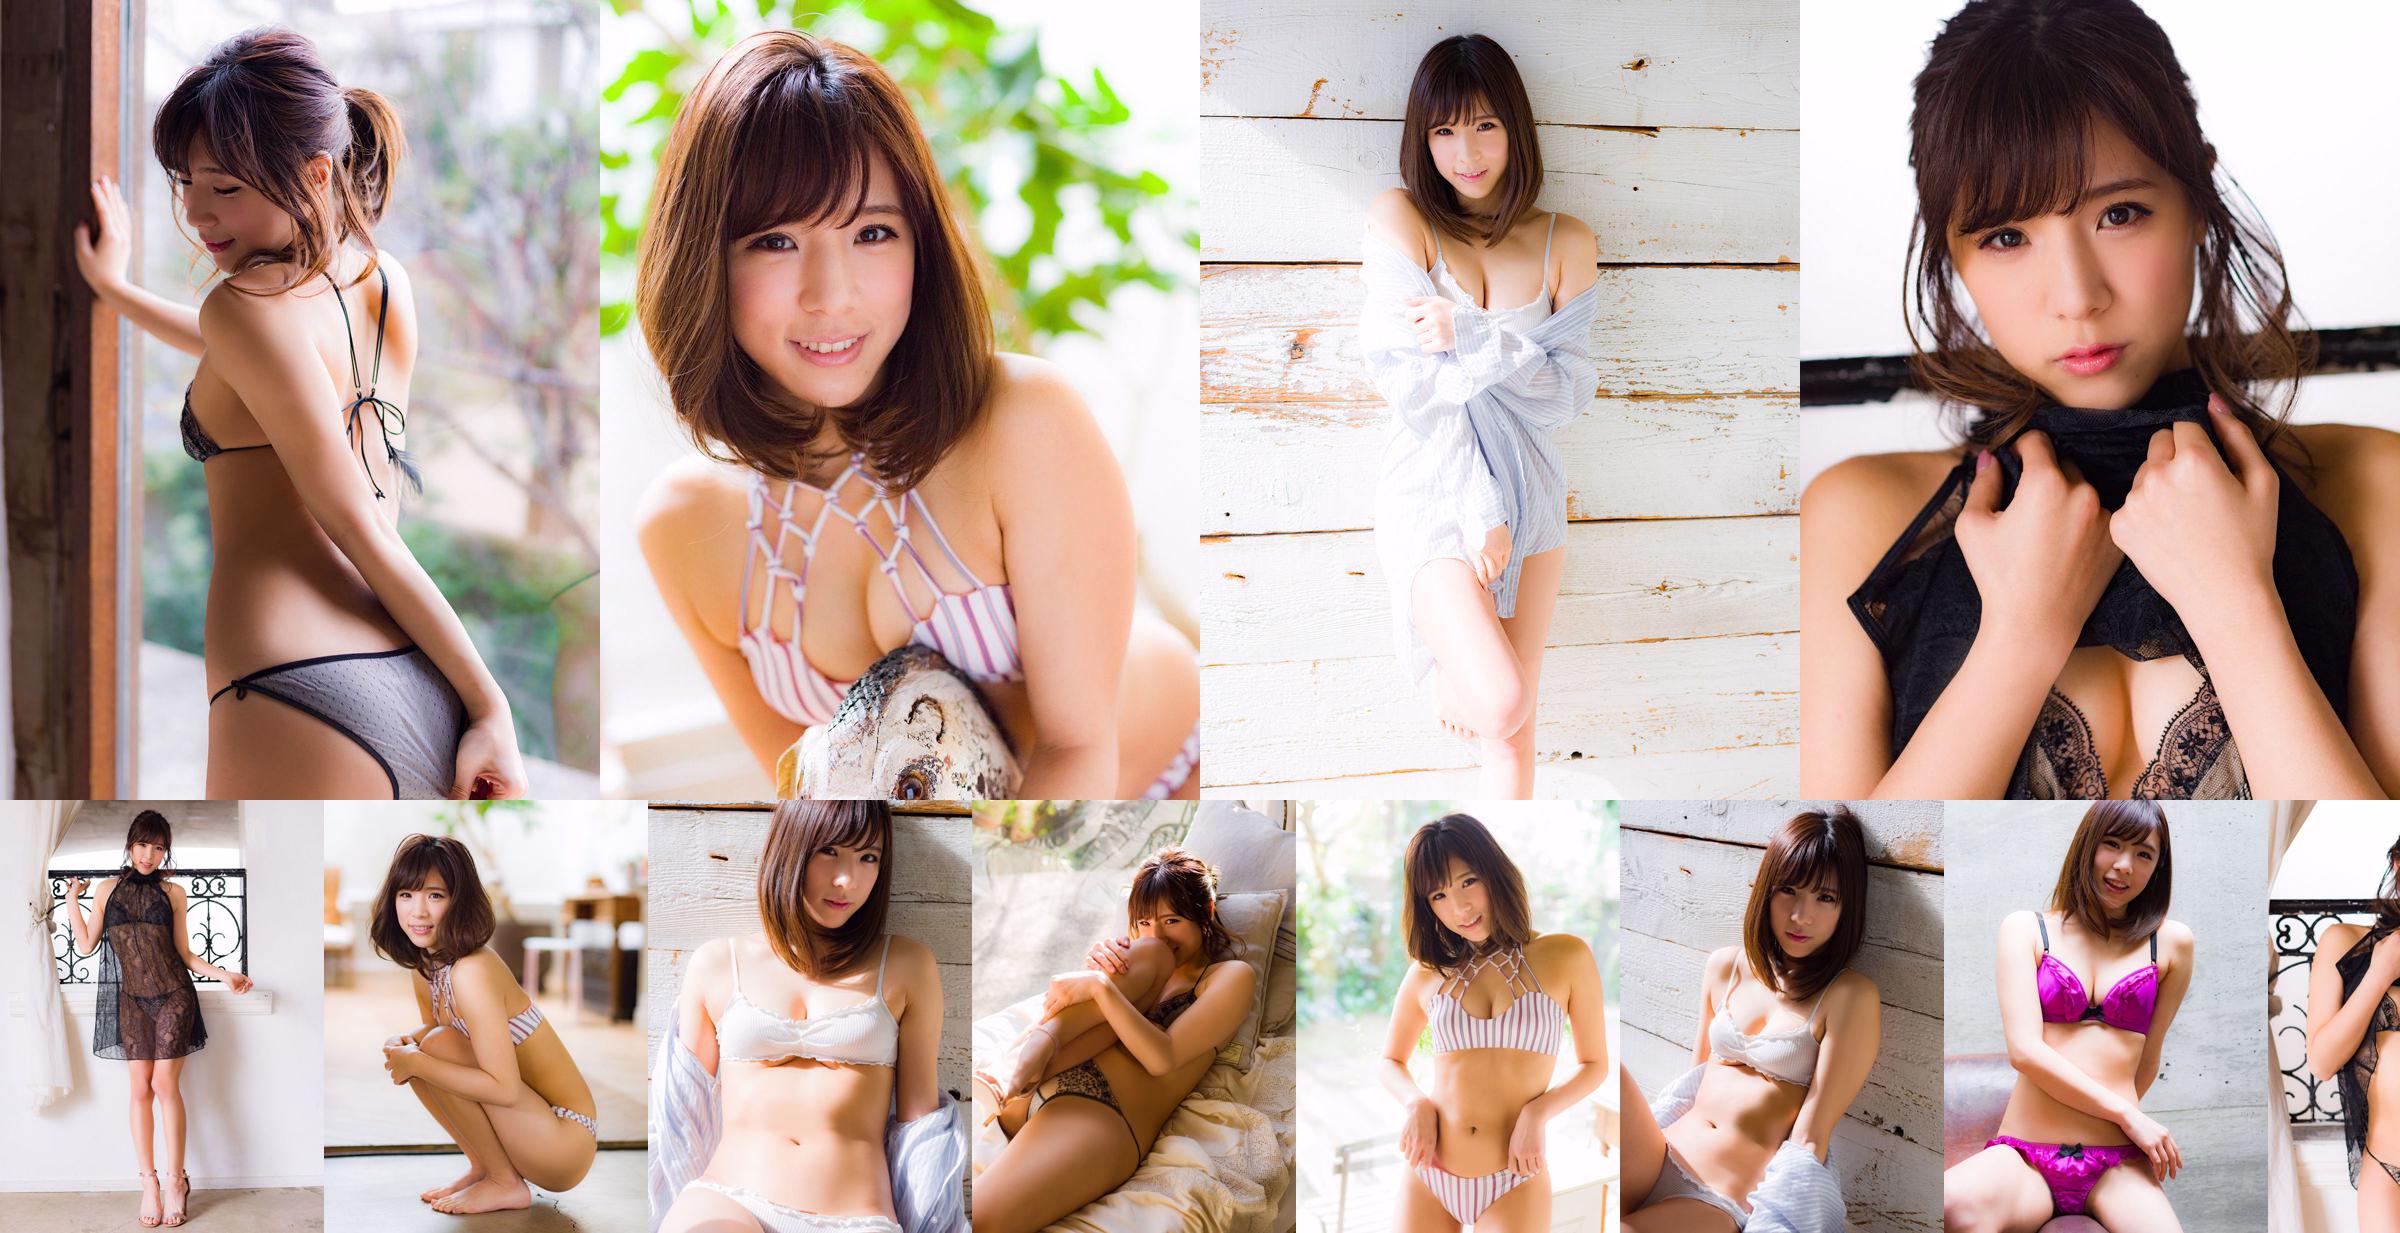 [DGC] 2019.01 あさみ Natsumoto "After the event, グラビアに challenge!  No.15d277 Page 2